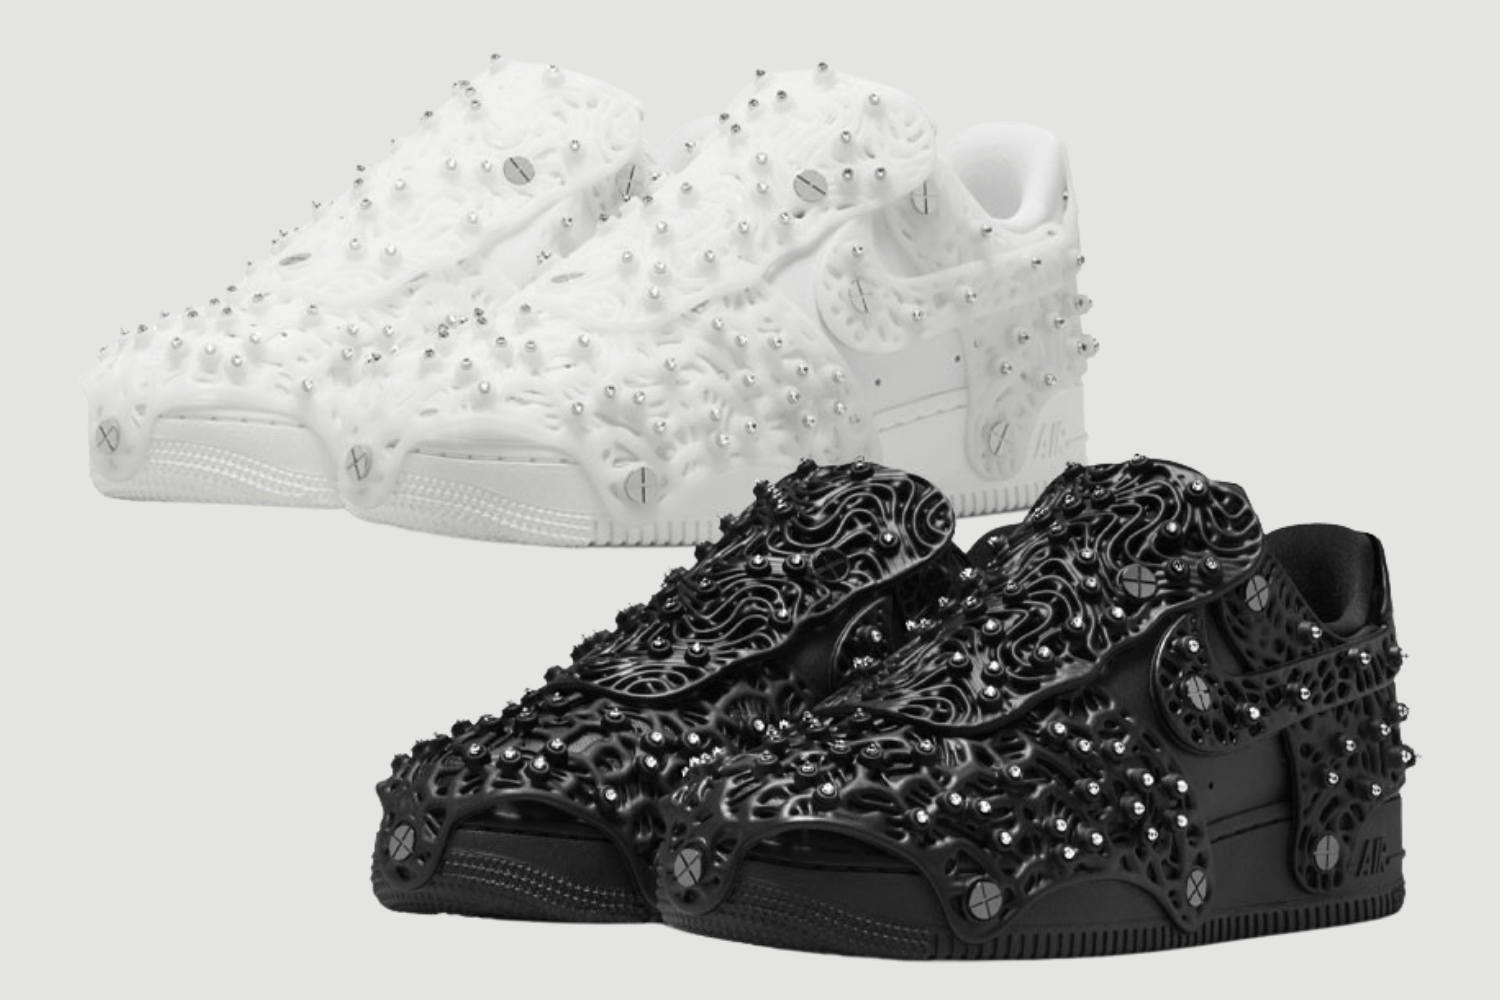 The Swarovski x Nike Air Force 1 has a remarkable design